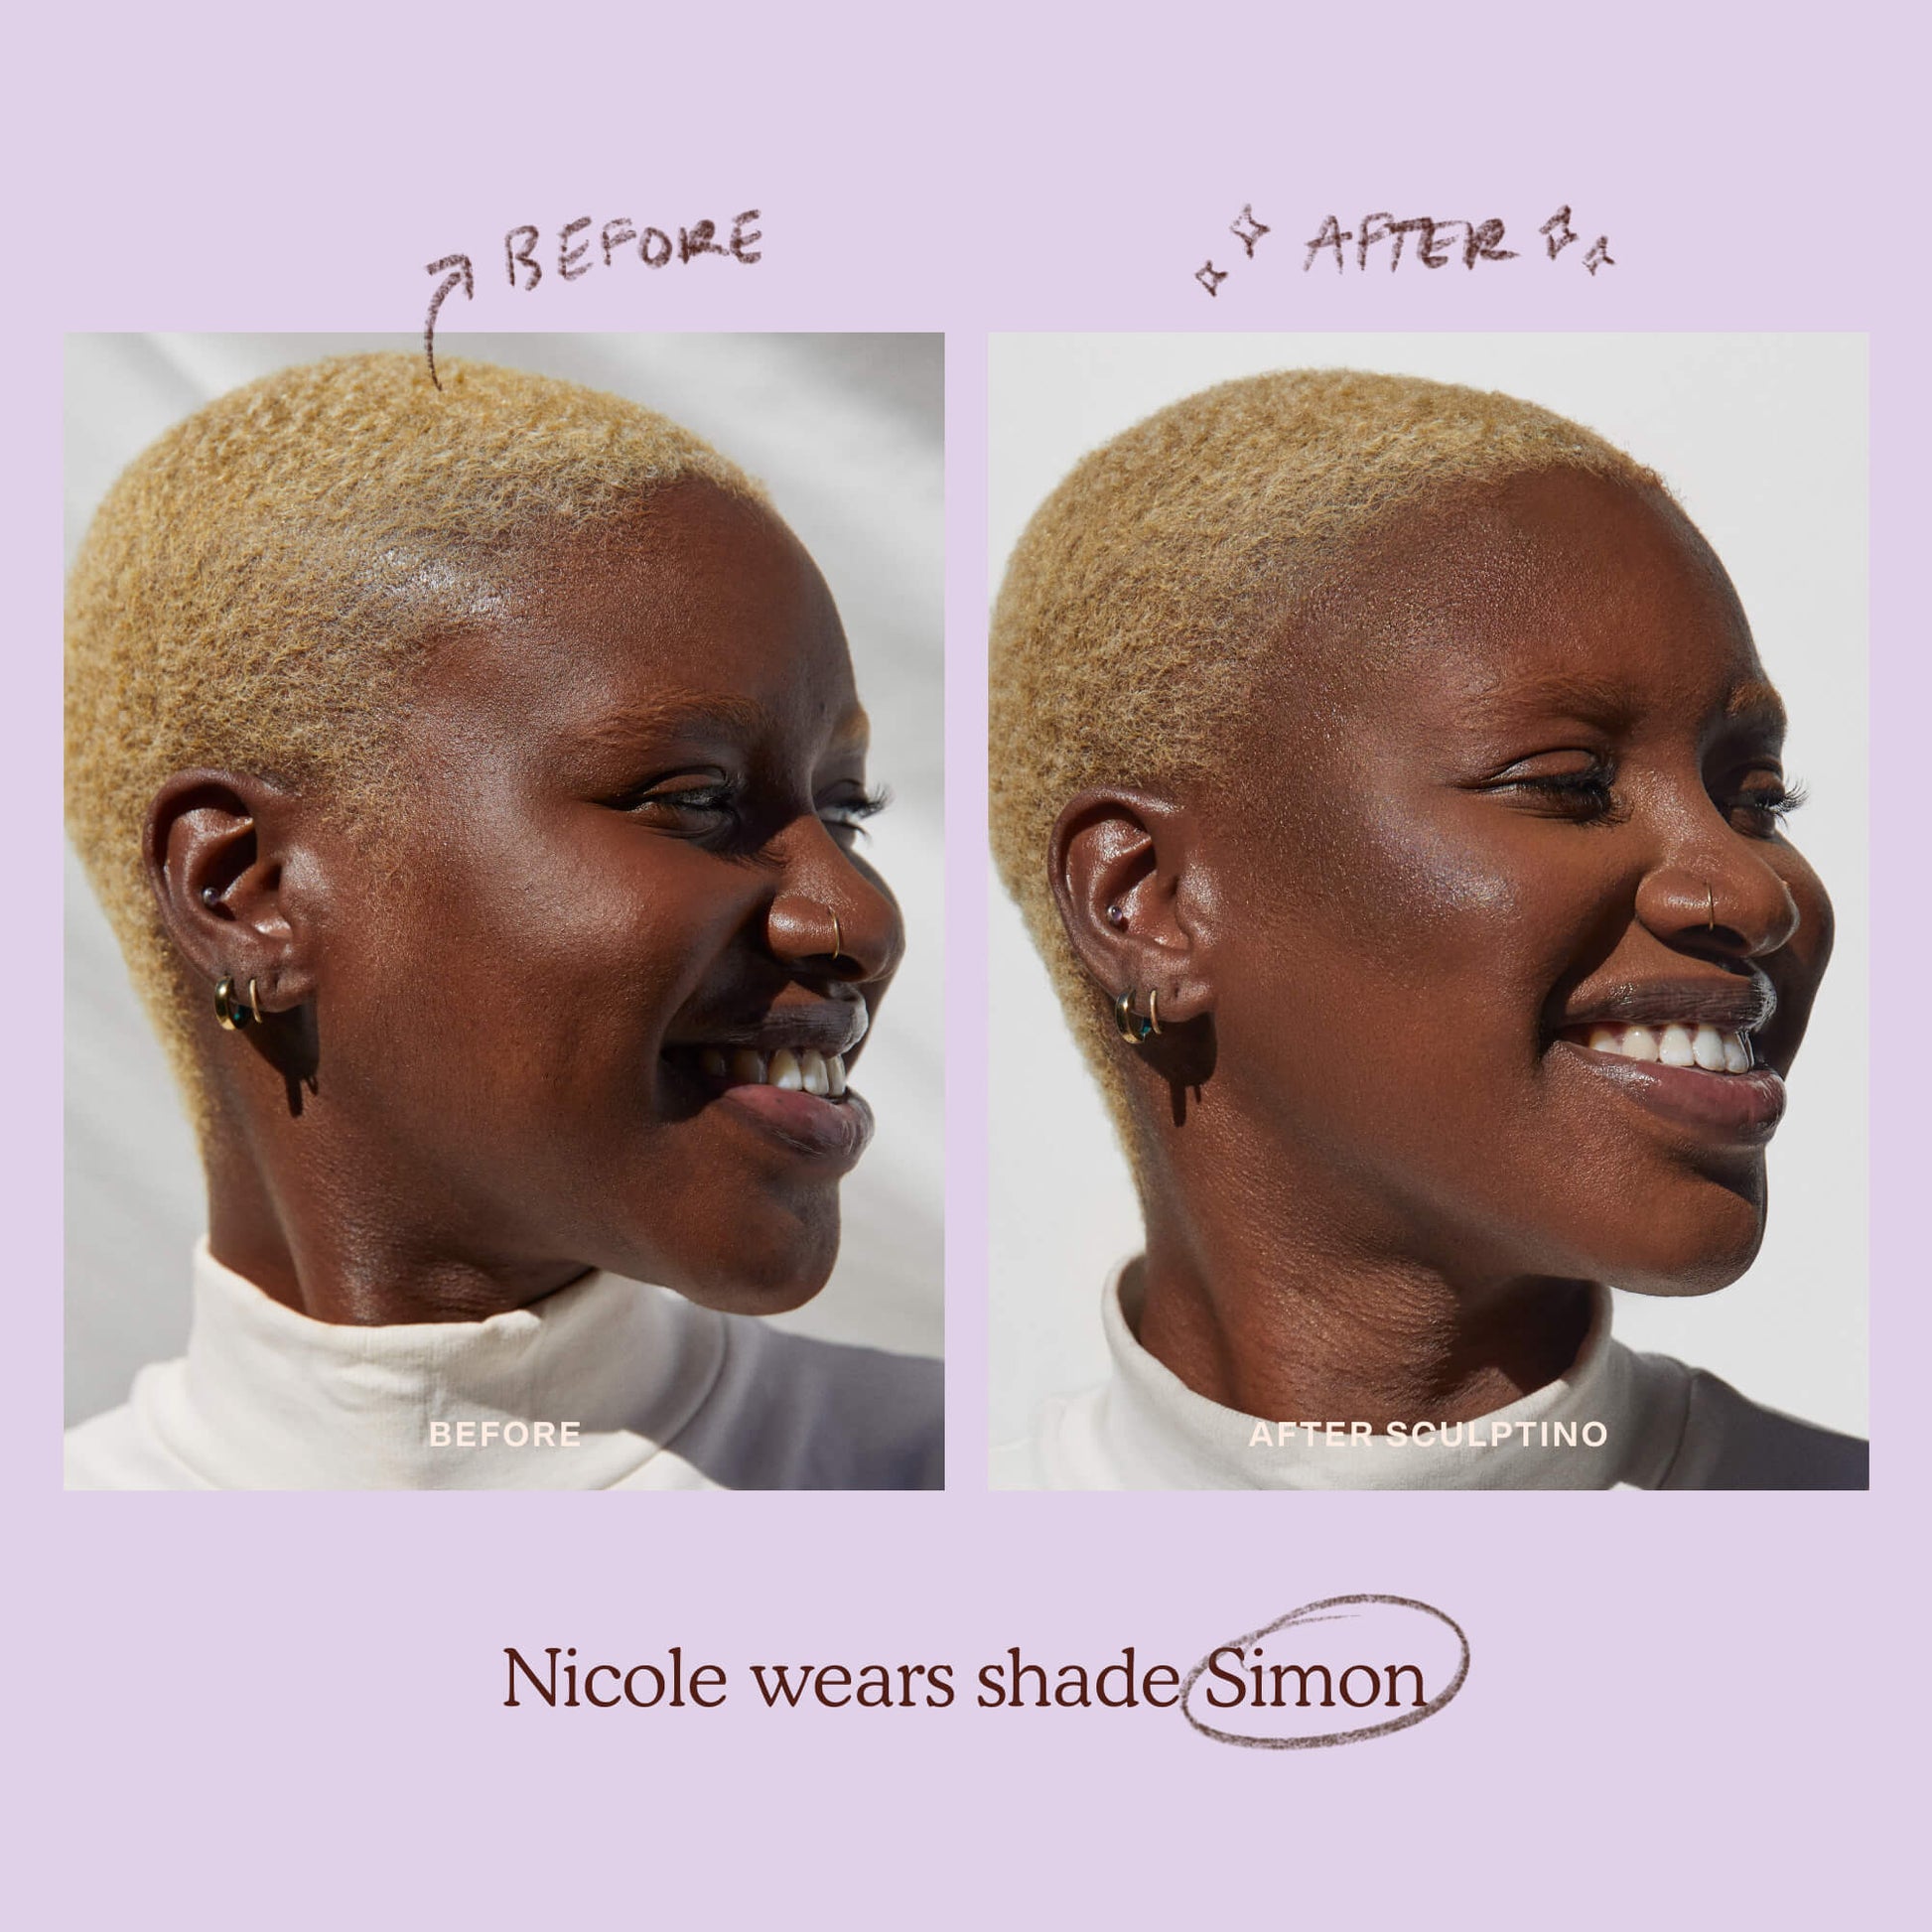 A model before and after applying the Tower 28 Beauty Sculptino™ Cream Contour in the shade Simon